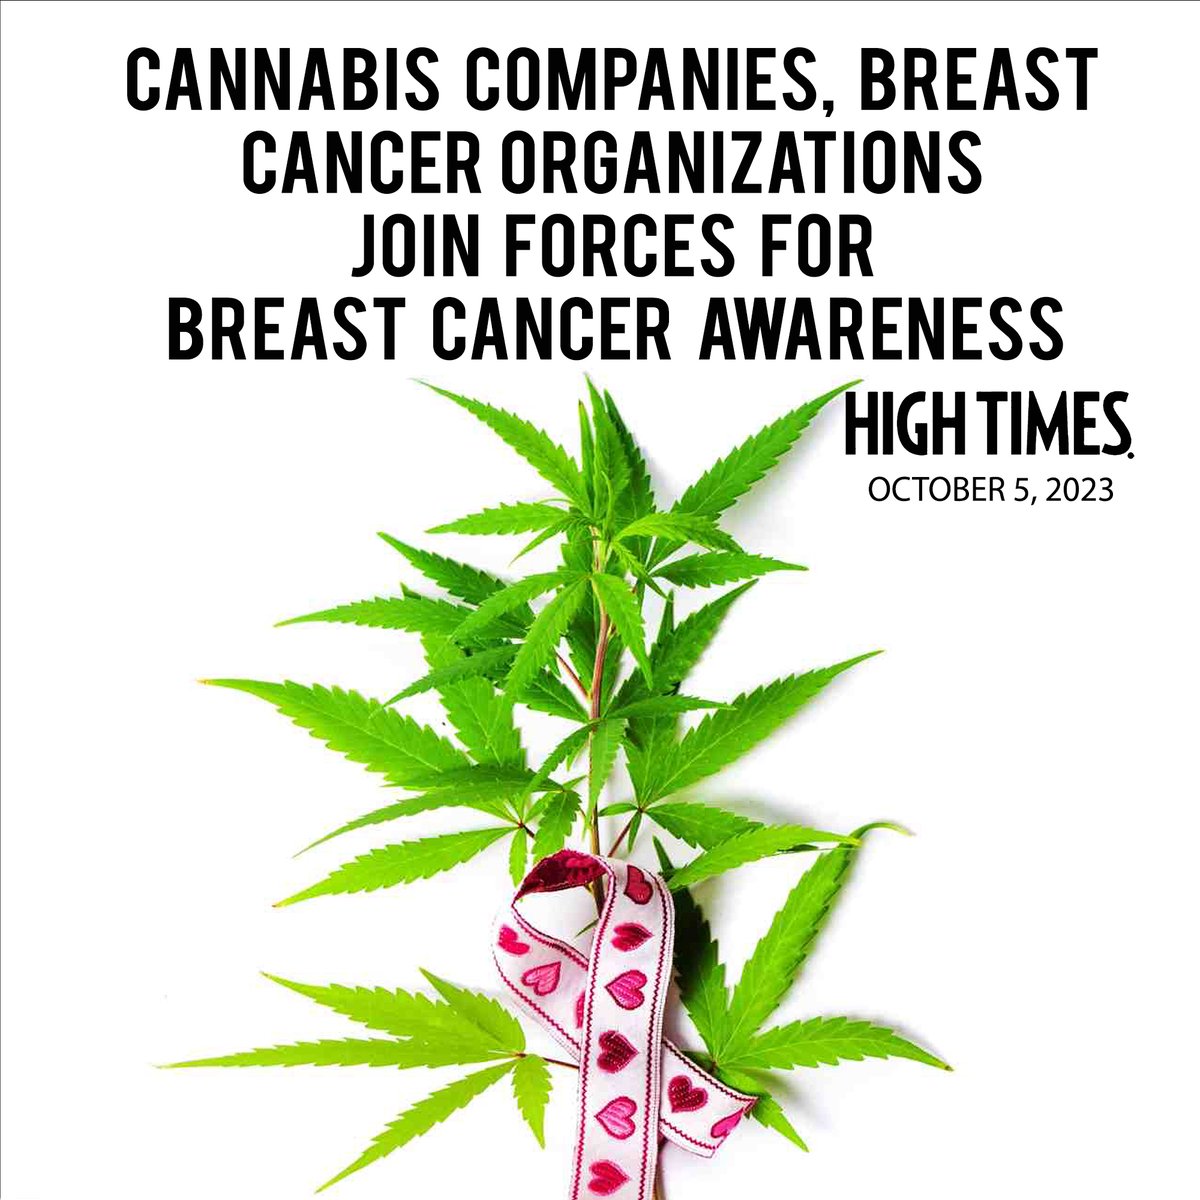 NEWS You Might Have Missed           
 #cannabiscommunity #cancer #cancerkids #cancerawareness #cancerawarenessmonth #cancerawarness #420 #mmj #cannabiseducation #weedlife #medical #mmjcommunity #420community #cannakids #cannamoms